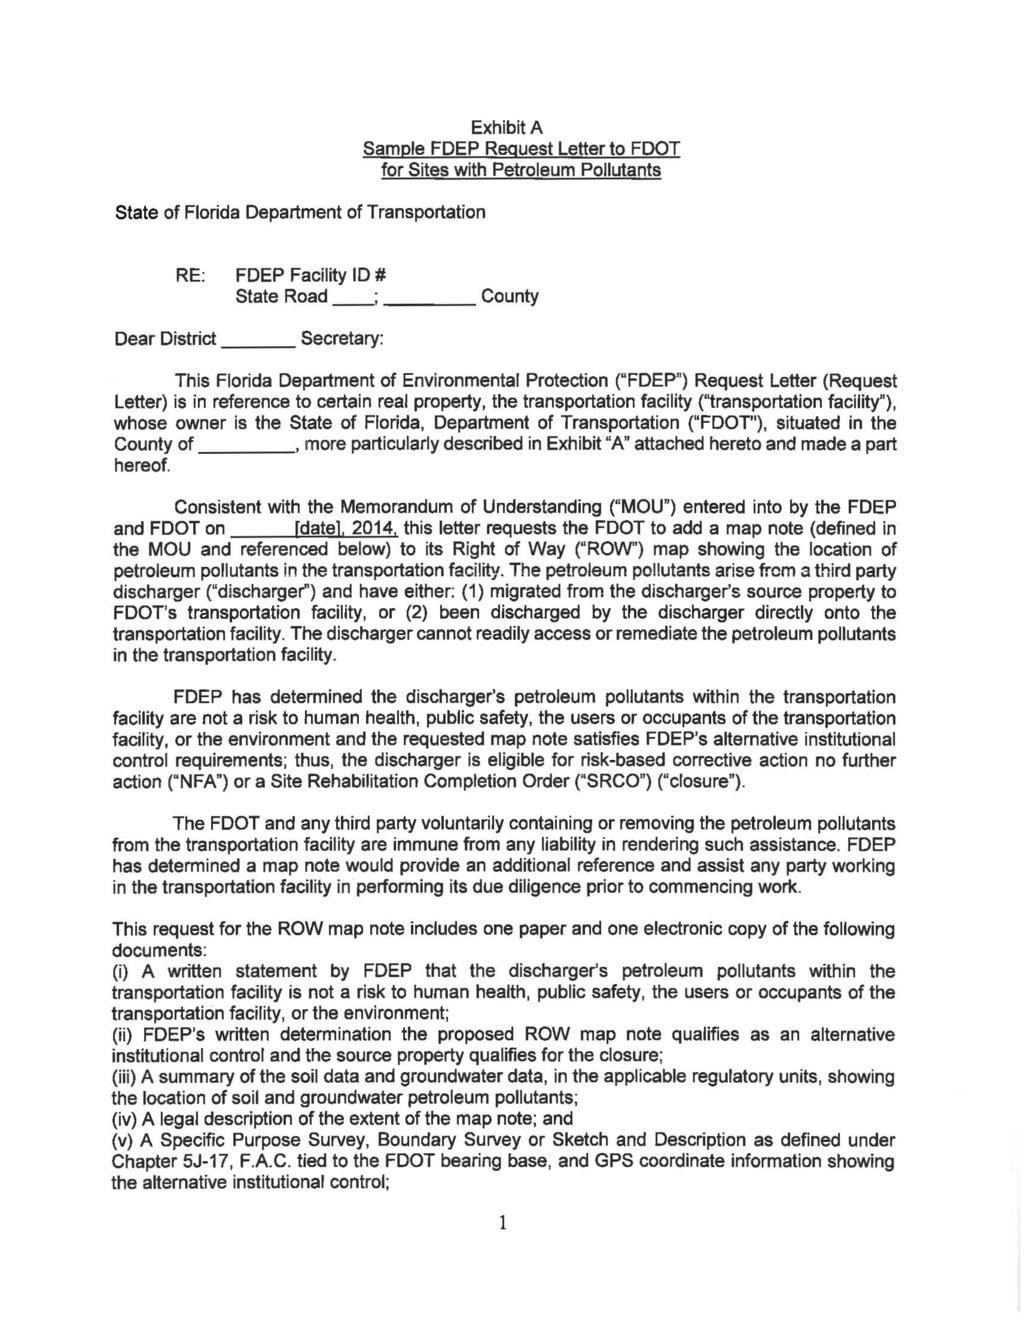 State of Florida Department of Transportation Exhibit A Sample FDEP Request Letter to FDOT for Sites with Petroleum Pollutants RE: FDEP Facility ID# State Road, County Dear District Secretary: This